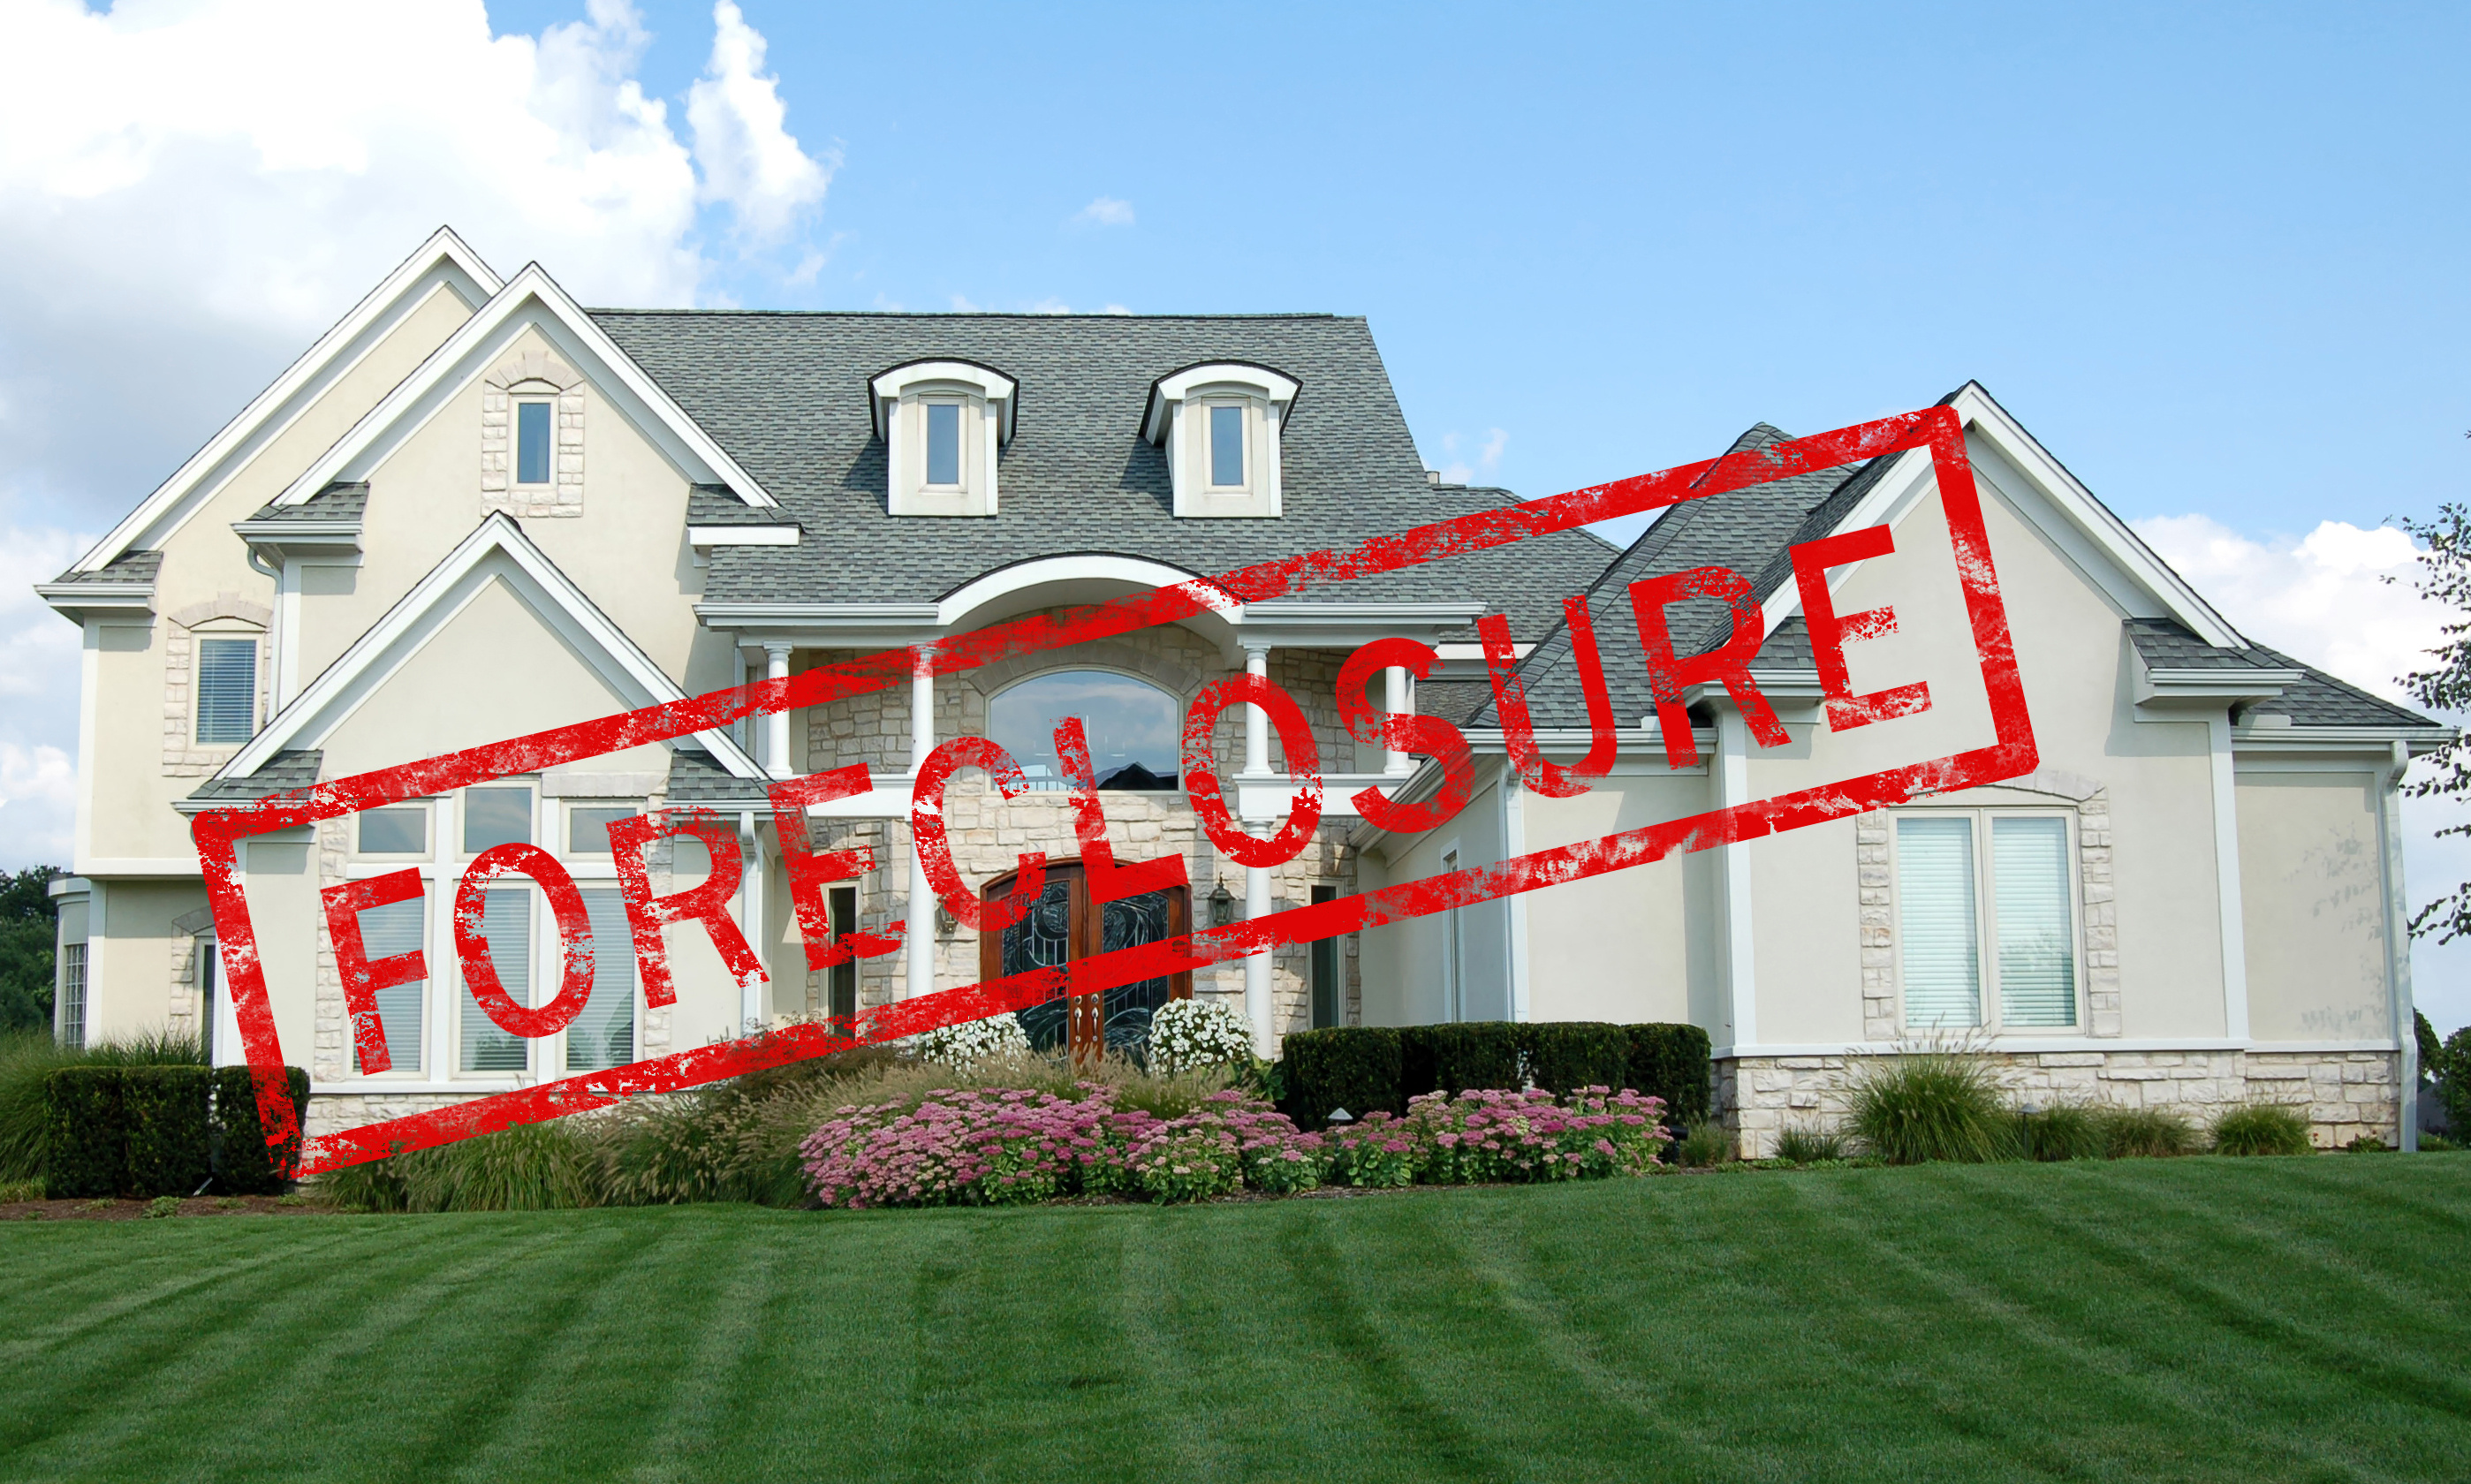 Call Peterson Appraisal Group to discuss appraisals pertaining to Placer foreclosures